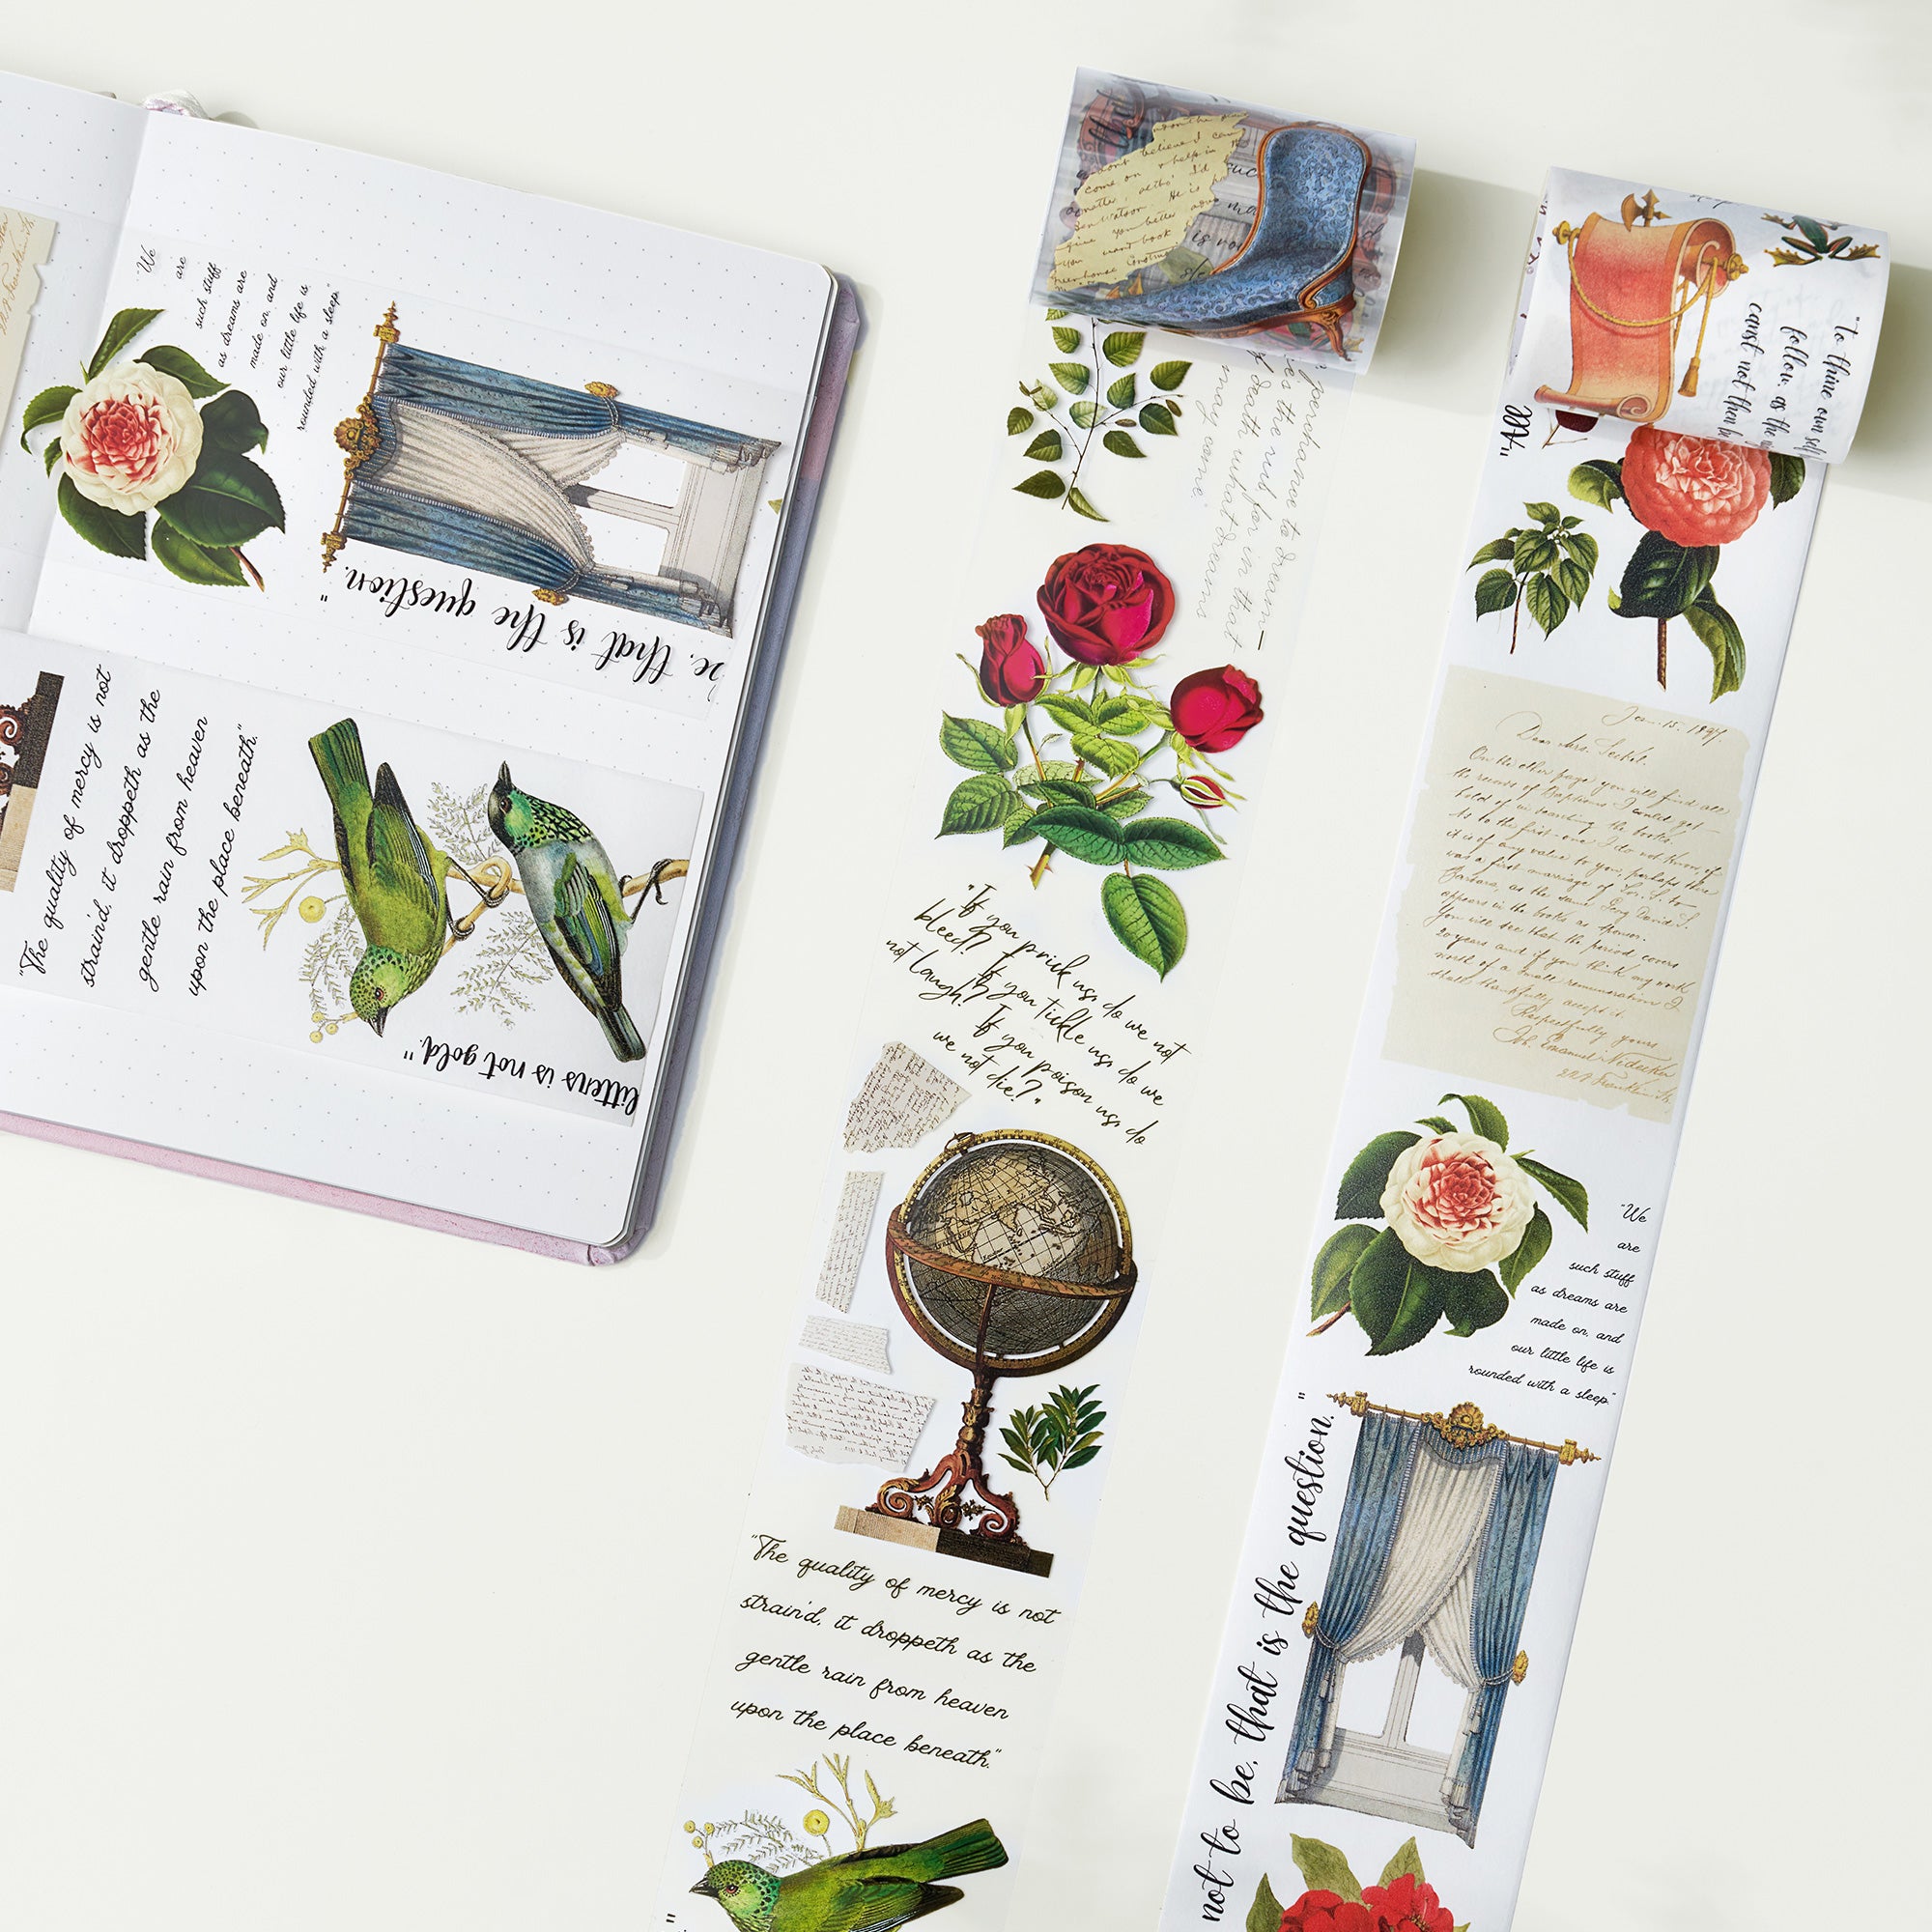 Macbeth's Manuscripts Wide Washi / PET Tape | The Washi Tape Shop. Beautiful Washi and Decorative Tape For Bullet Journals, Gift Wrapping, Planner Decoration and DIY Projects